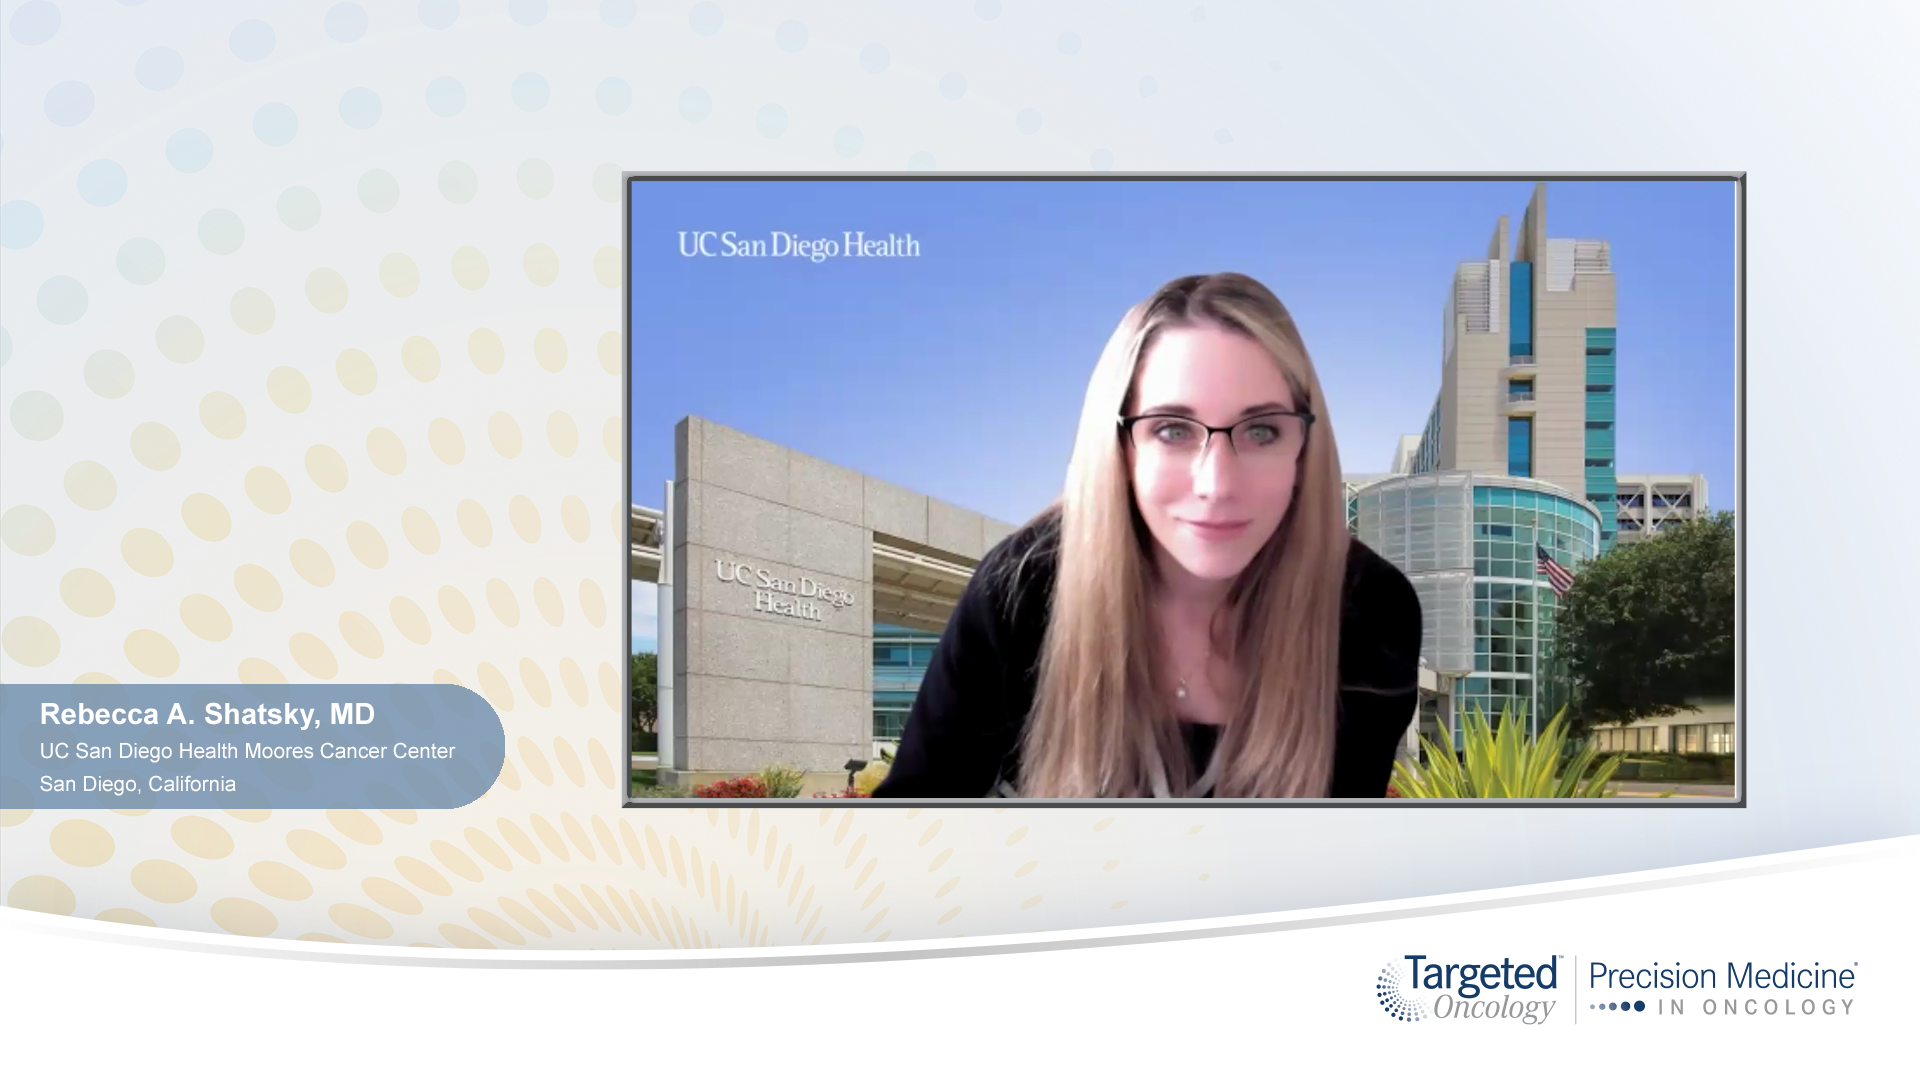 Video 6 - "Current Approaches to Treatment Sequencing in HER2+ Breast Cancer"